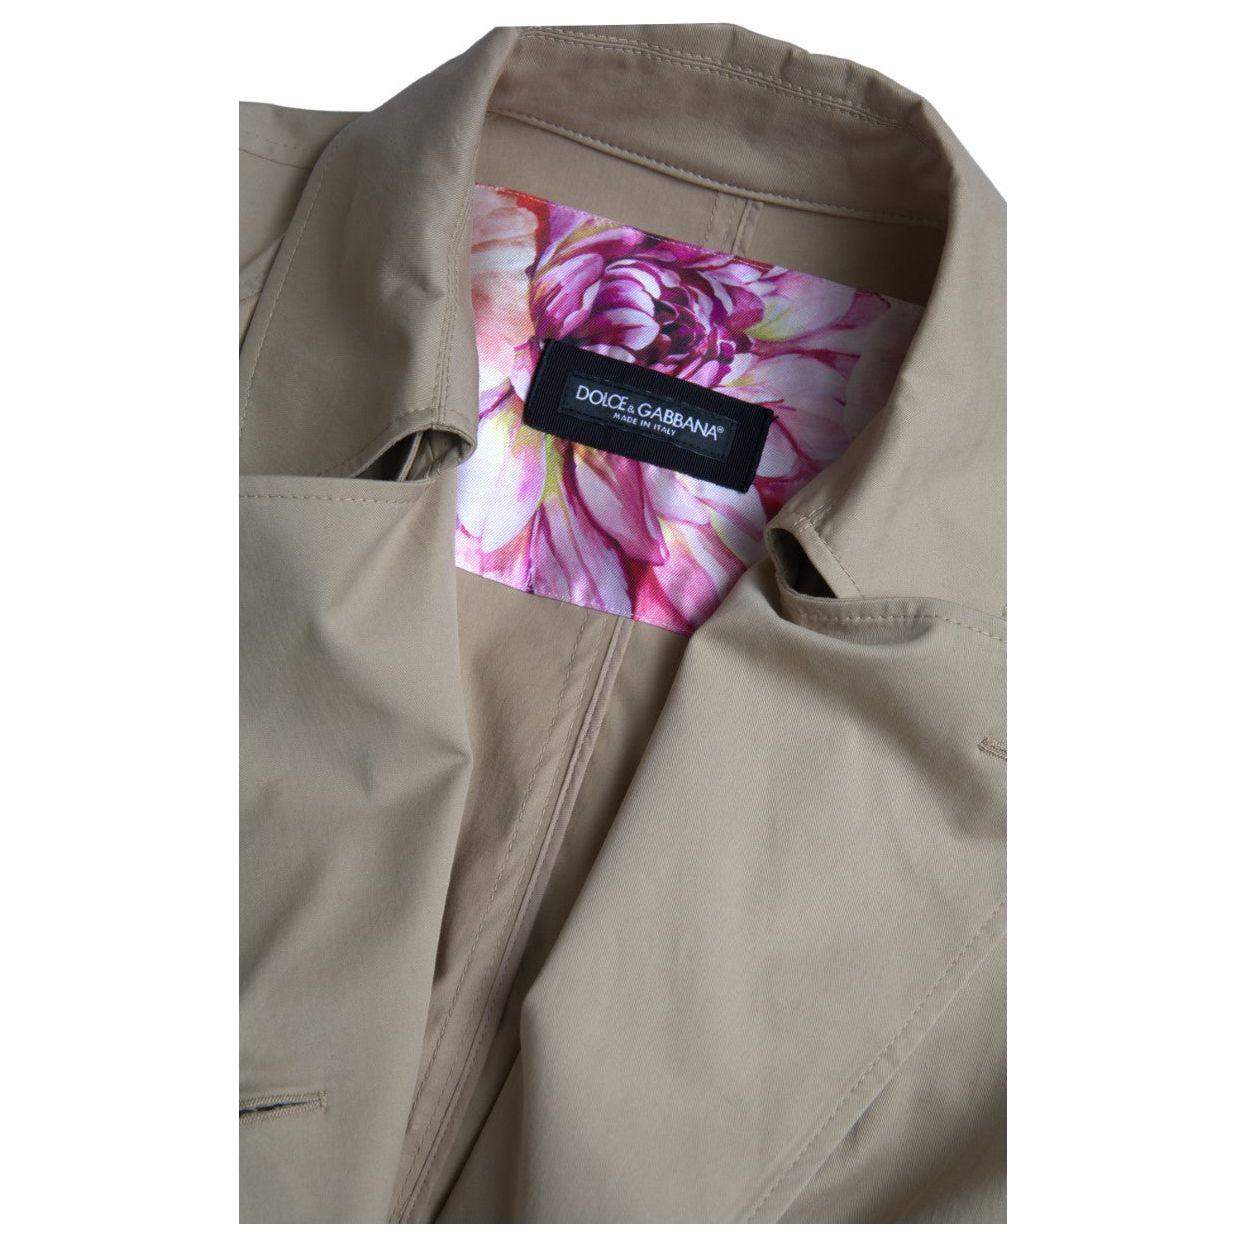 Dolce & Gabbana Elegant Double Breasted Trench Coat khaki-double-breasted-trench-coat-jacket